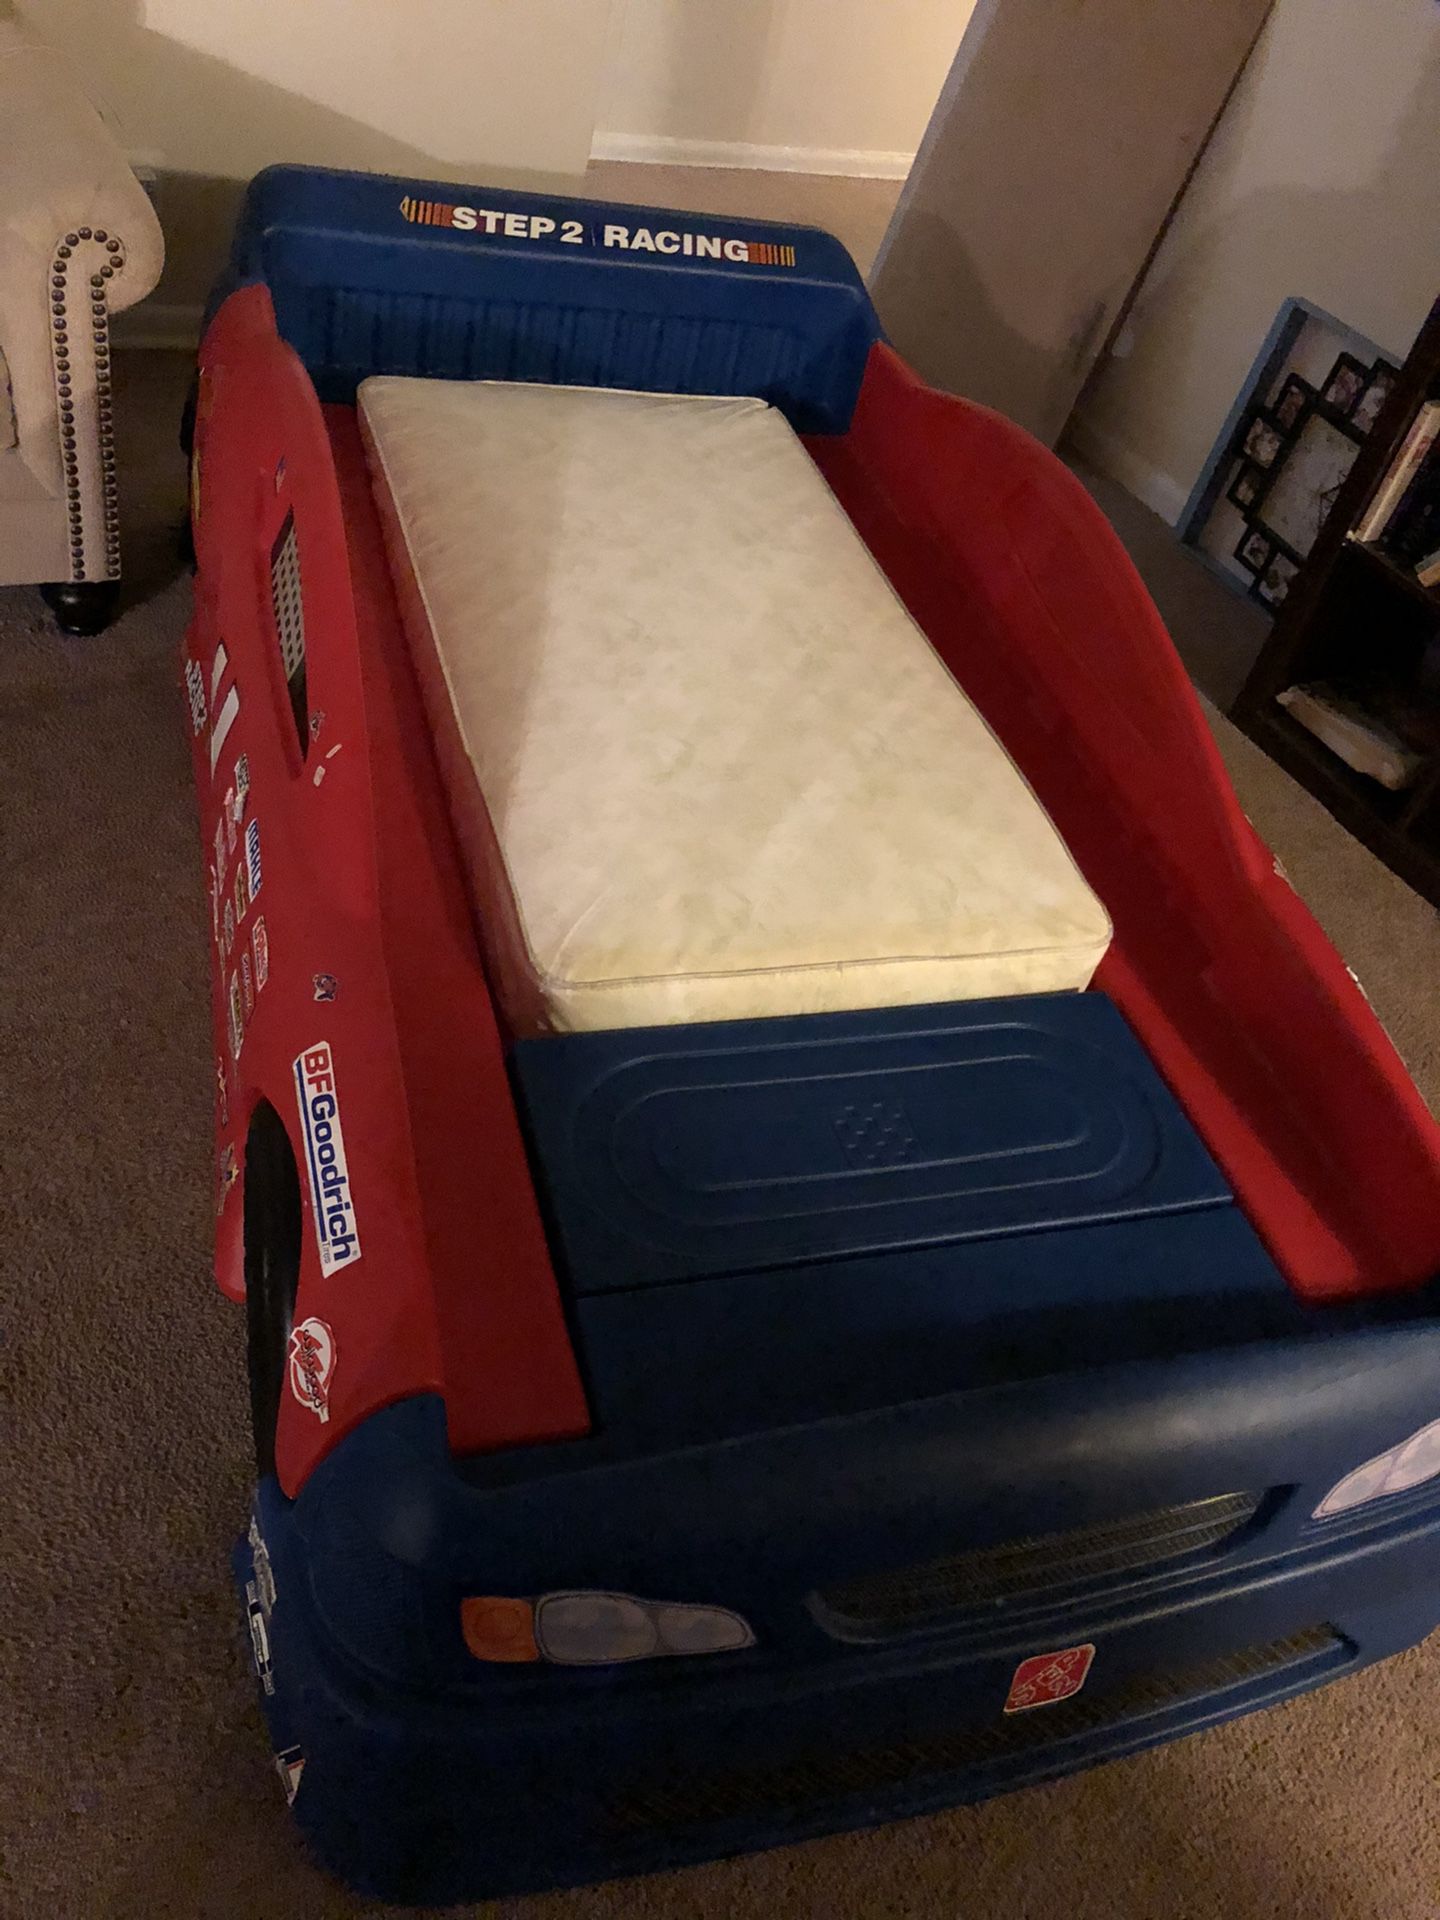 Bed frame for kids, drawer, toy chest and other toys